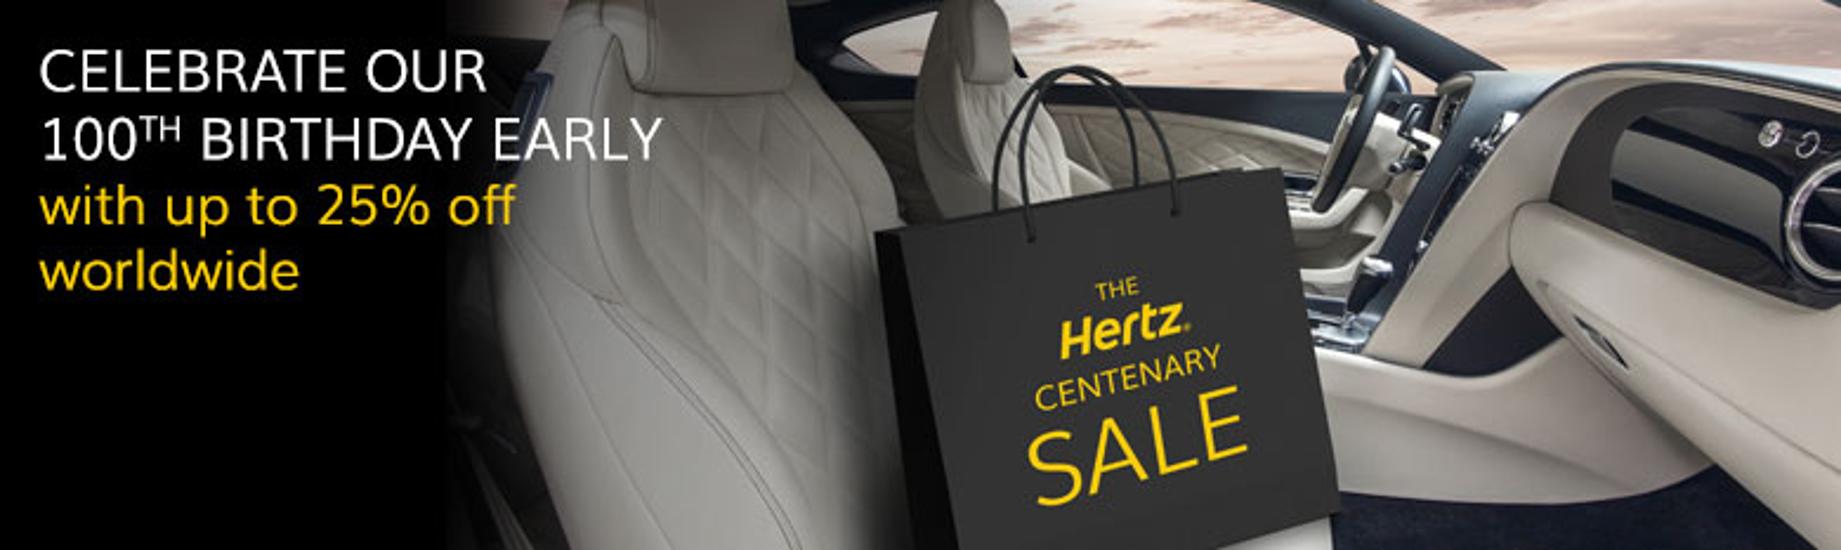 Celebrate Hertz’s 100th Birthday With Up To 20% Discount Worldwide